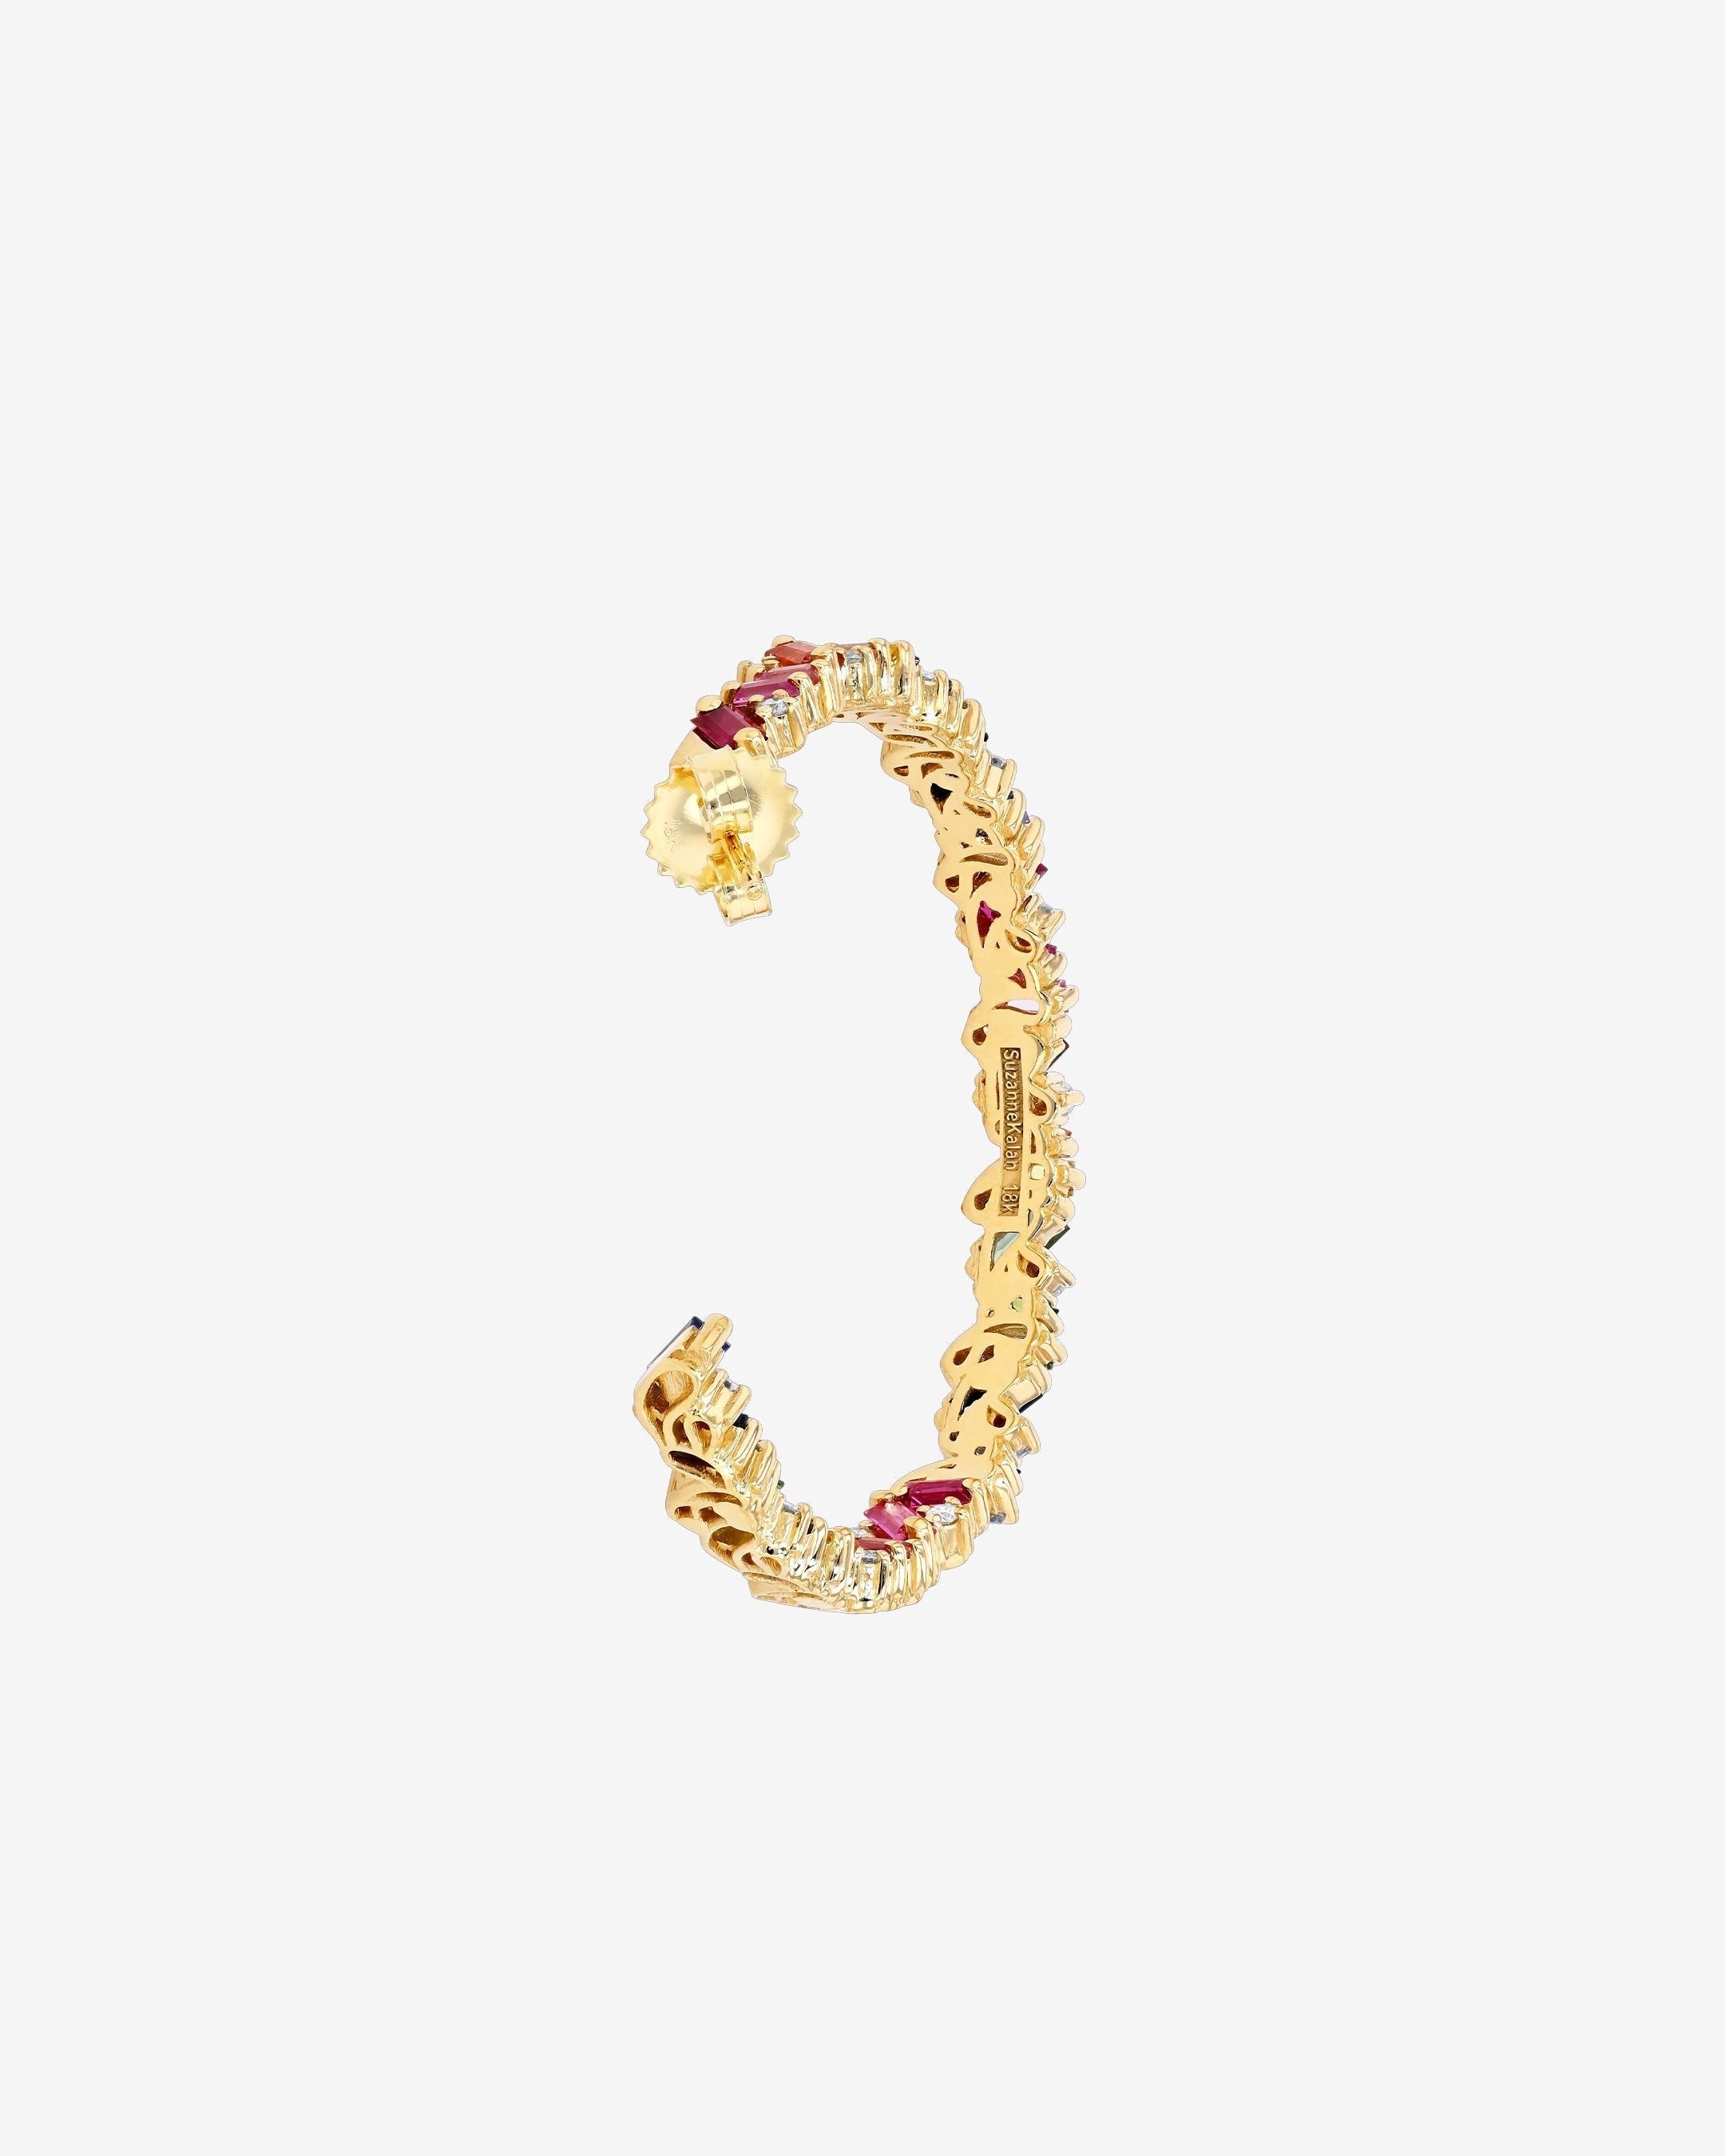 Suzanne Kalan Frenzy Rainbow Sapphire Milli Hoops in 18k yellow gold